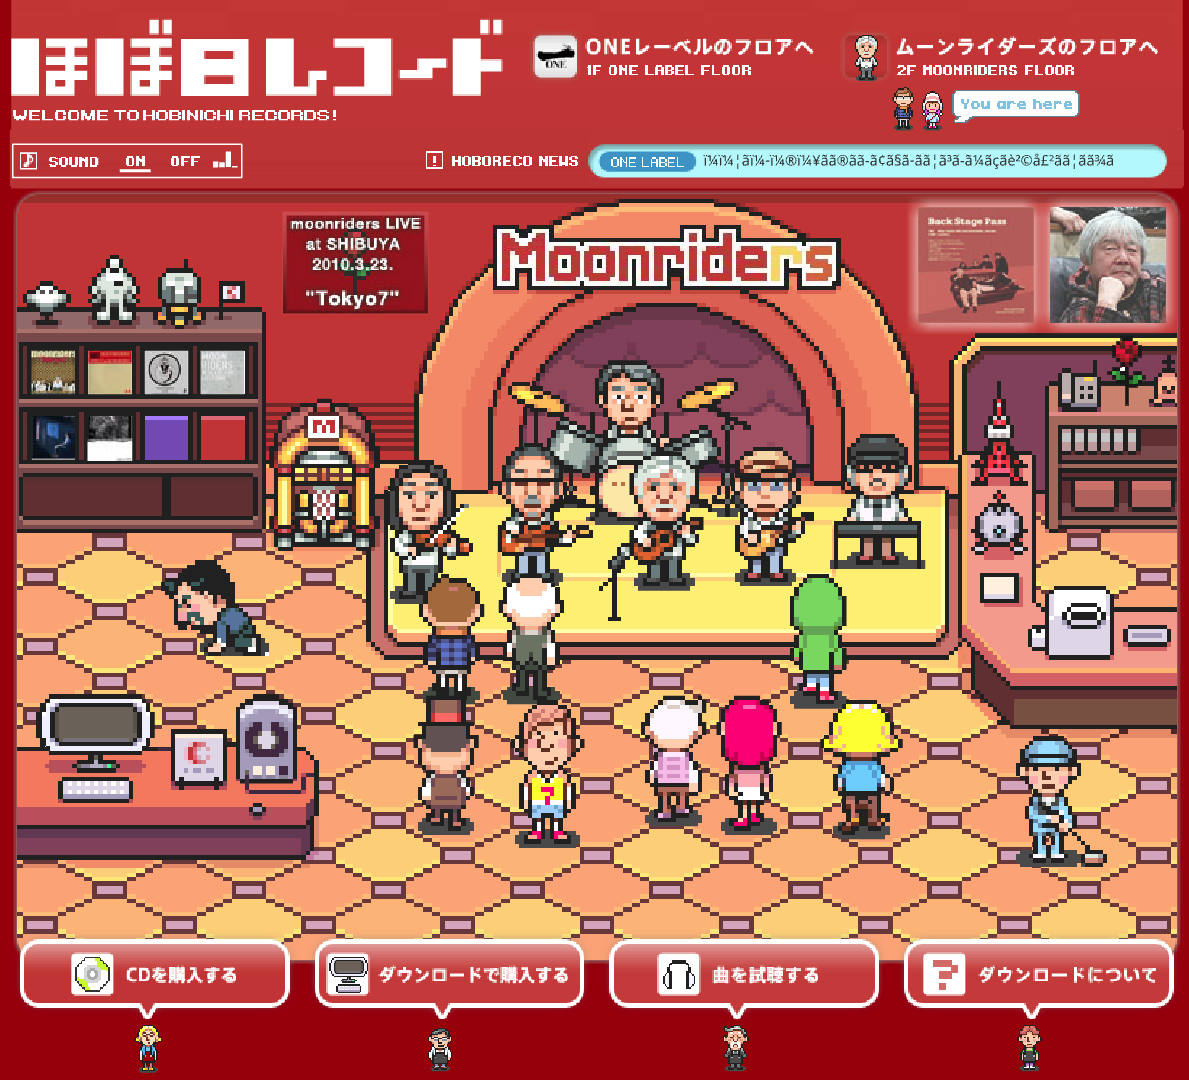 Hobonichi has a digital store for CDs and downloads of music by Keiichi Suzuki's band, the Moonriders. The art was made by Nobuhiro Imagawa. The store is has many MOTHER references, such as, the MOTHER 3+ album, figures of a Clayman, Starman, Mr. Saturn, etc. Even Biff shows up!